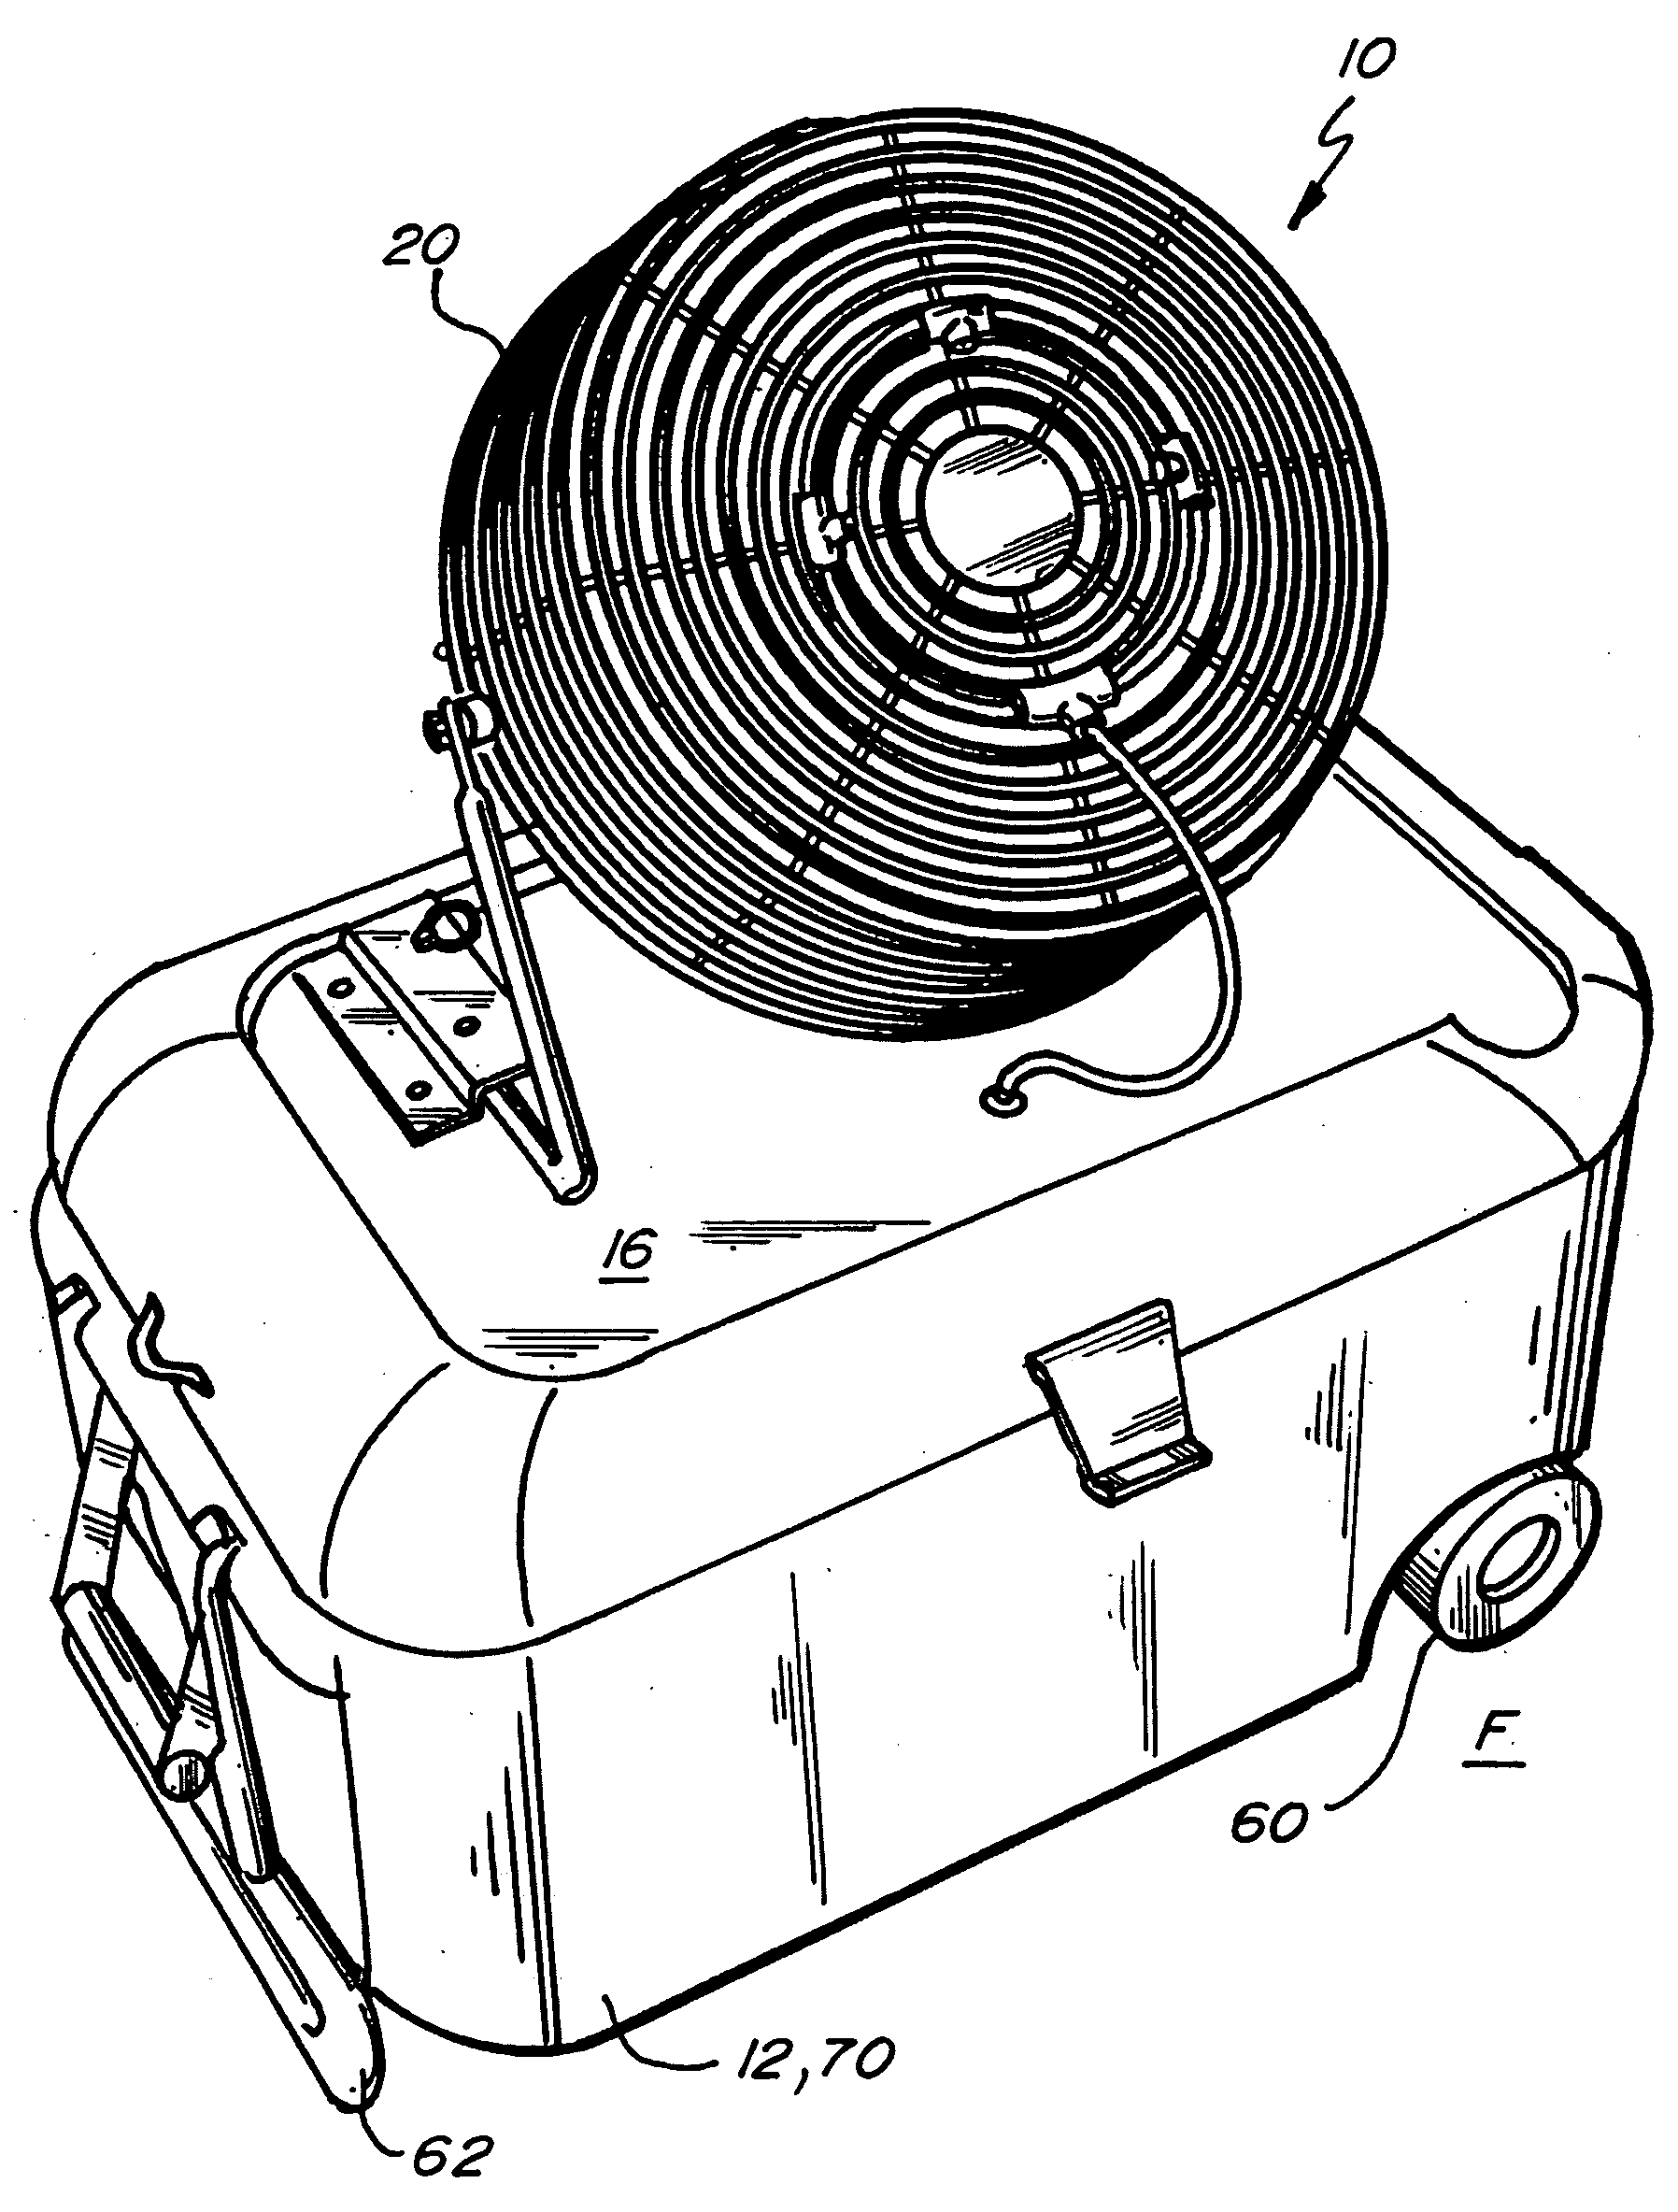 Collapsible misting fan apparatus